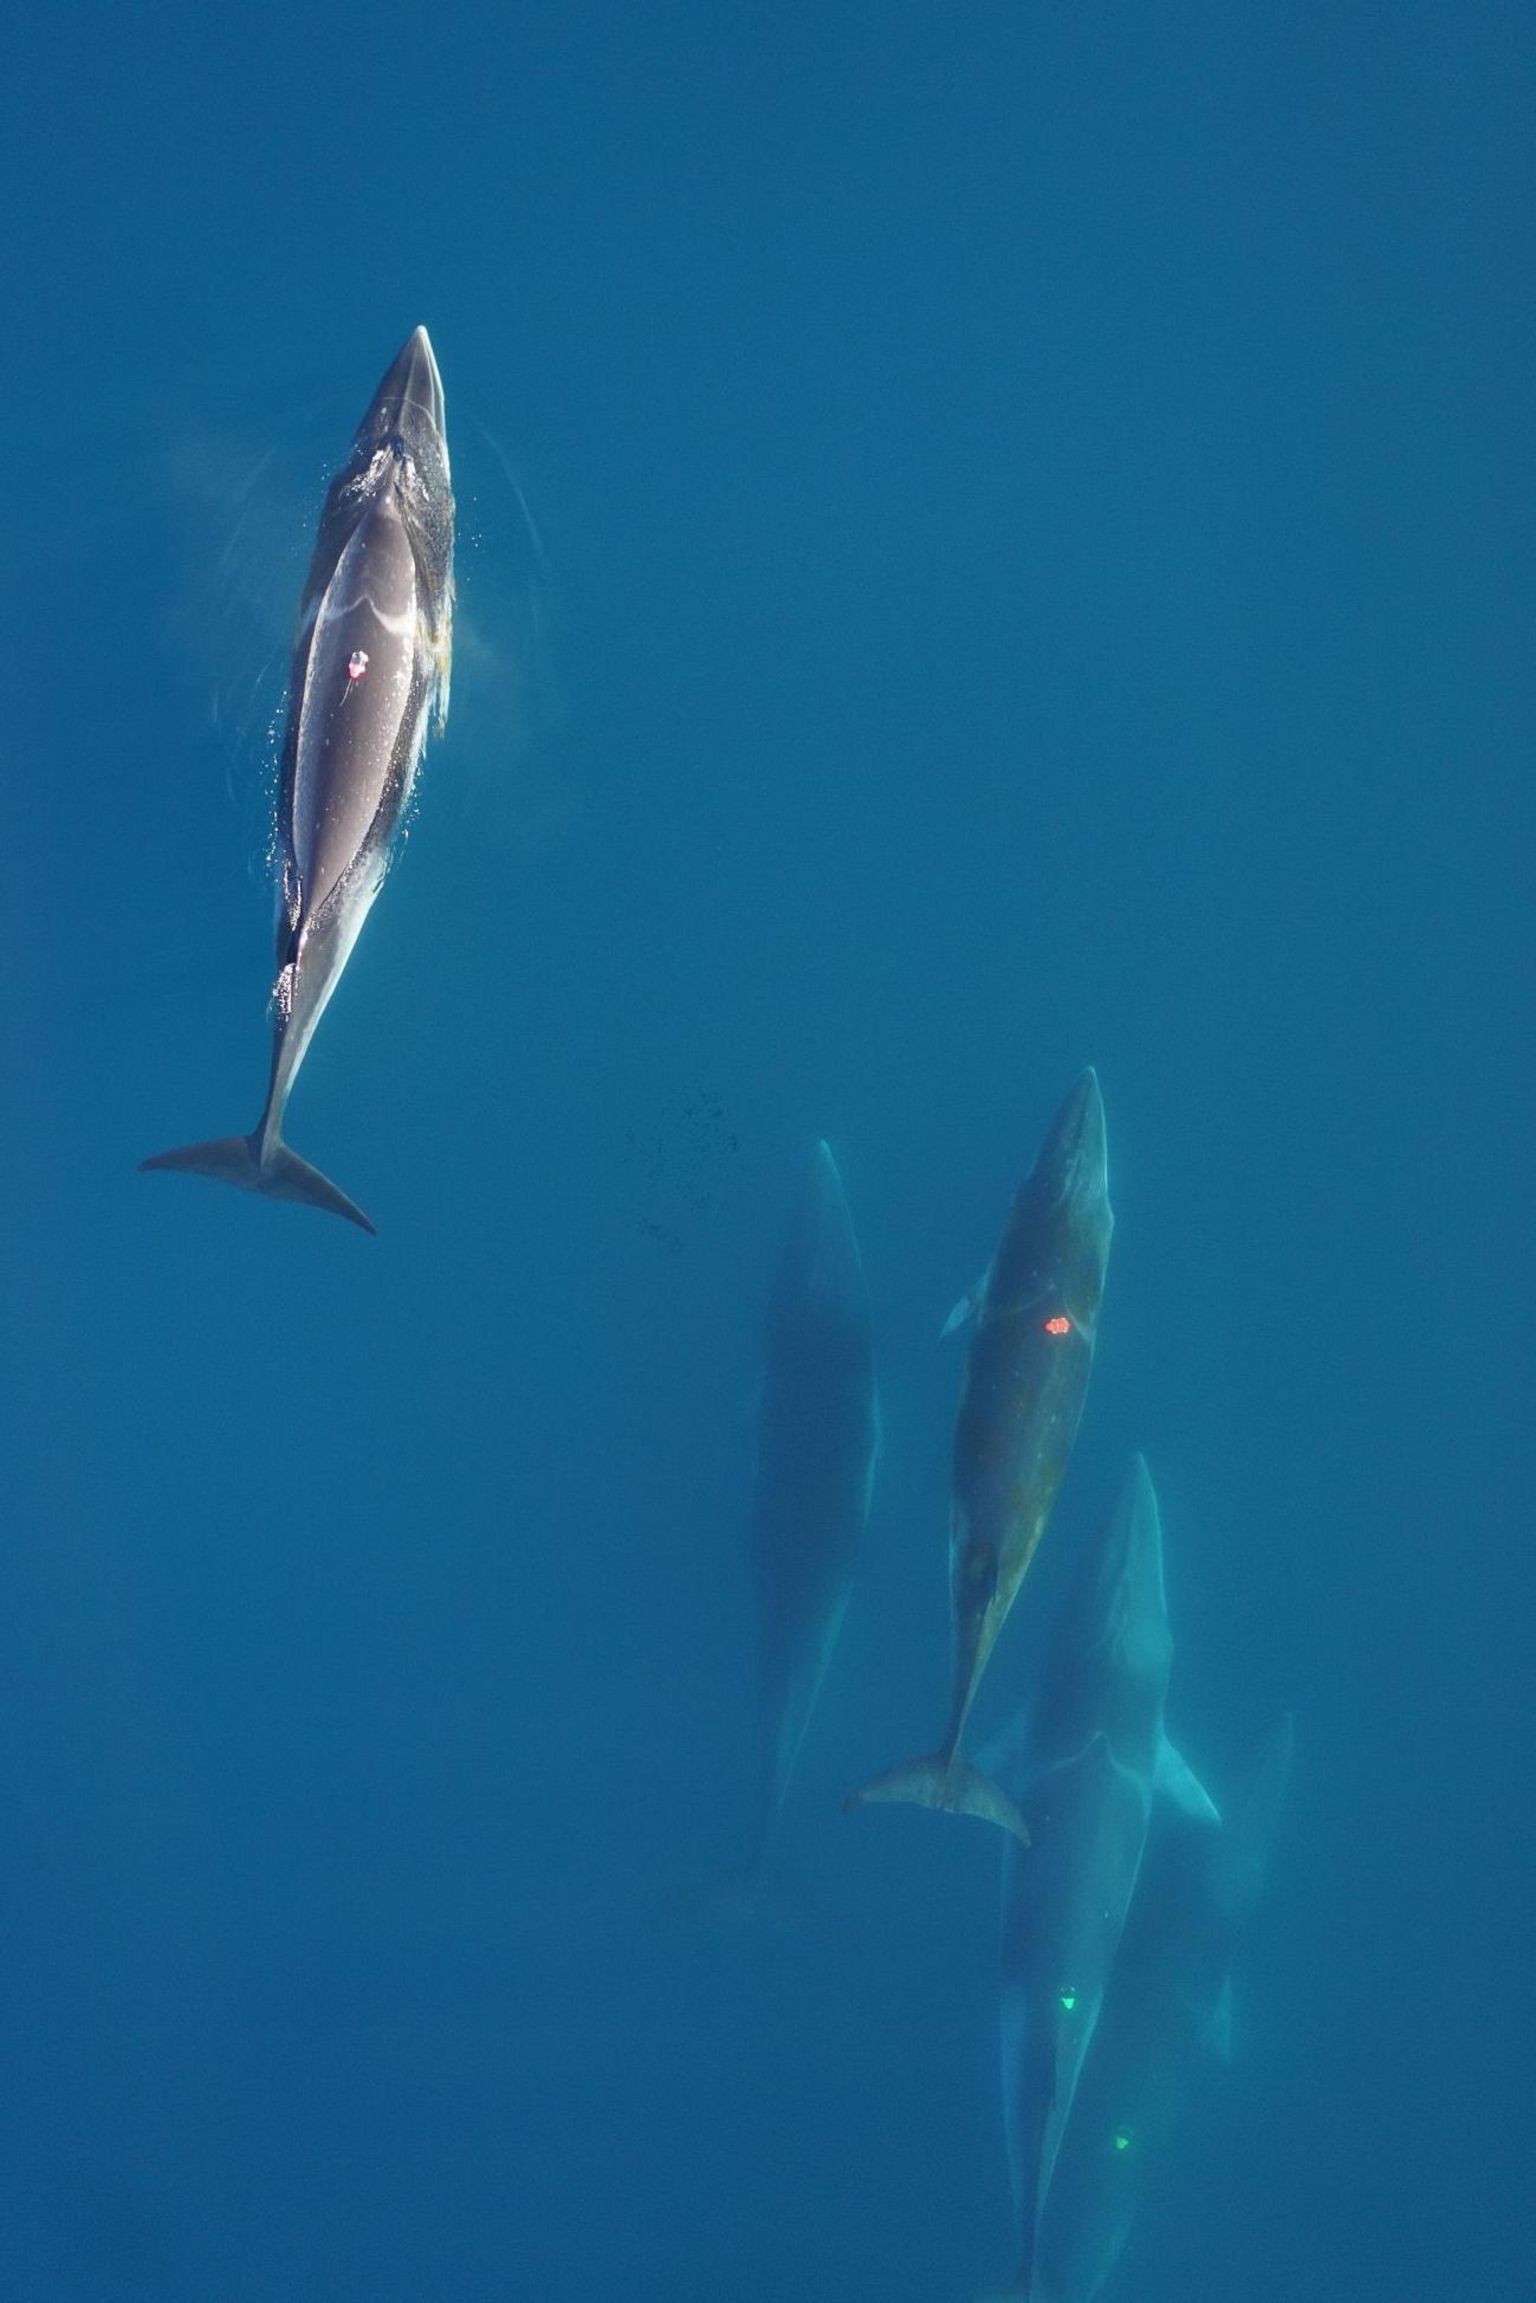 Antarctic minke whales photographed from a done. One animal has an orange, scientific tracking tag on its back